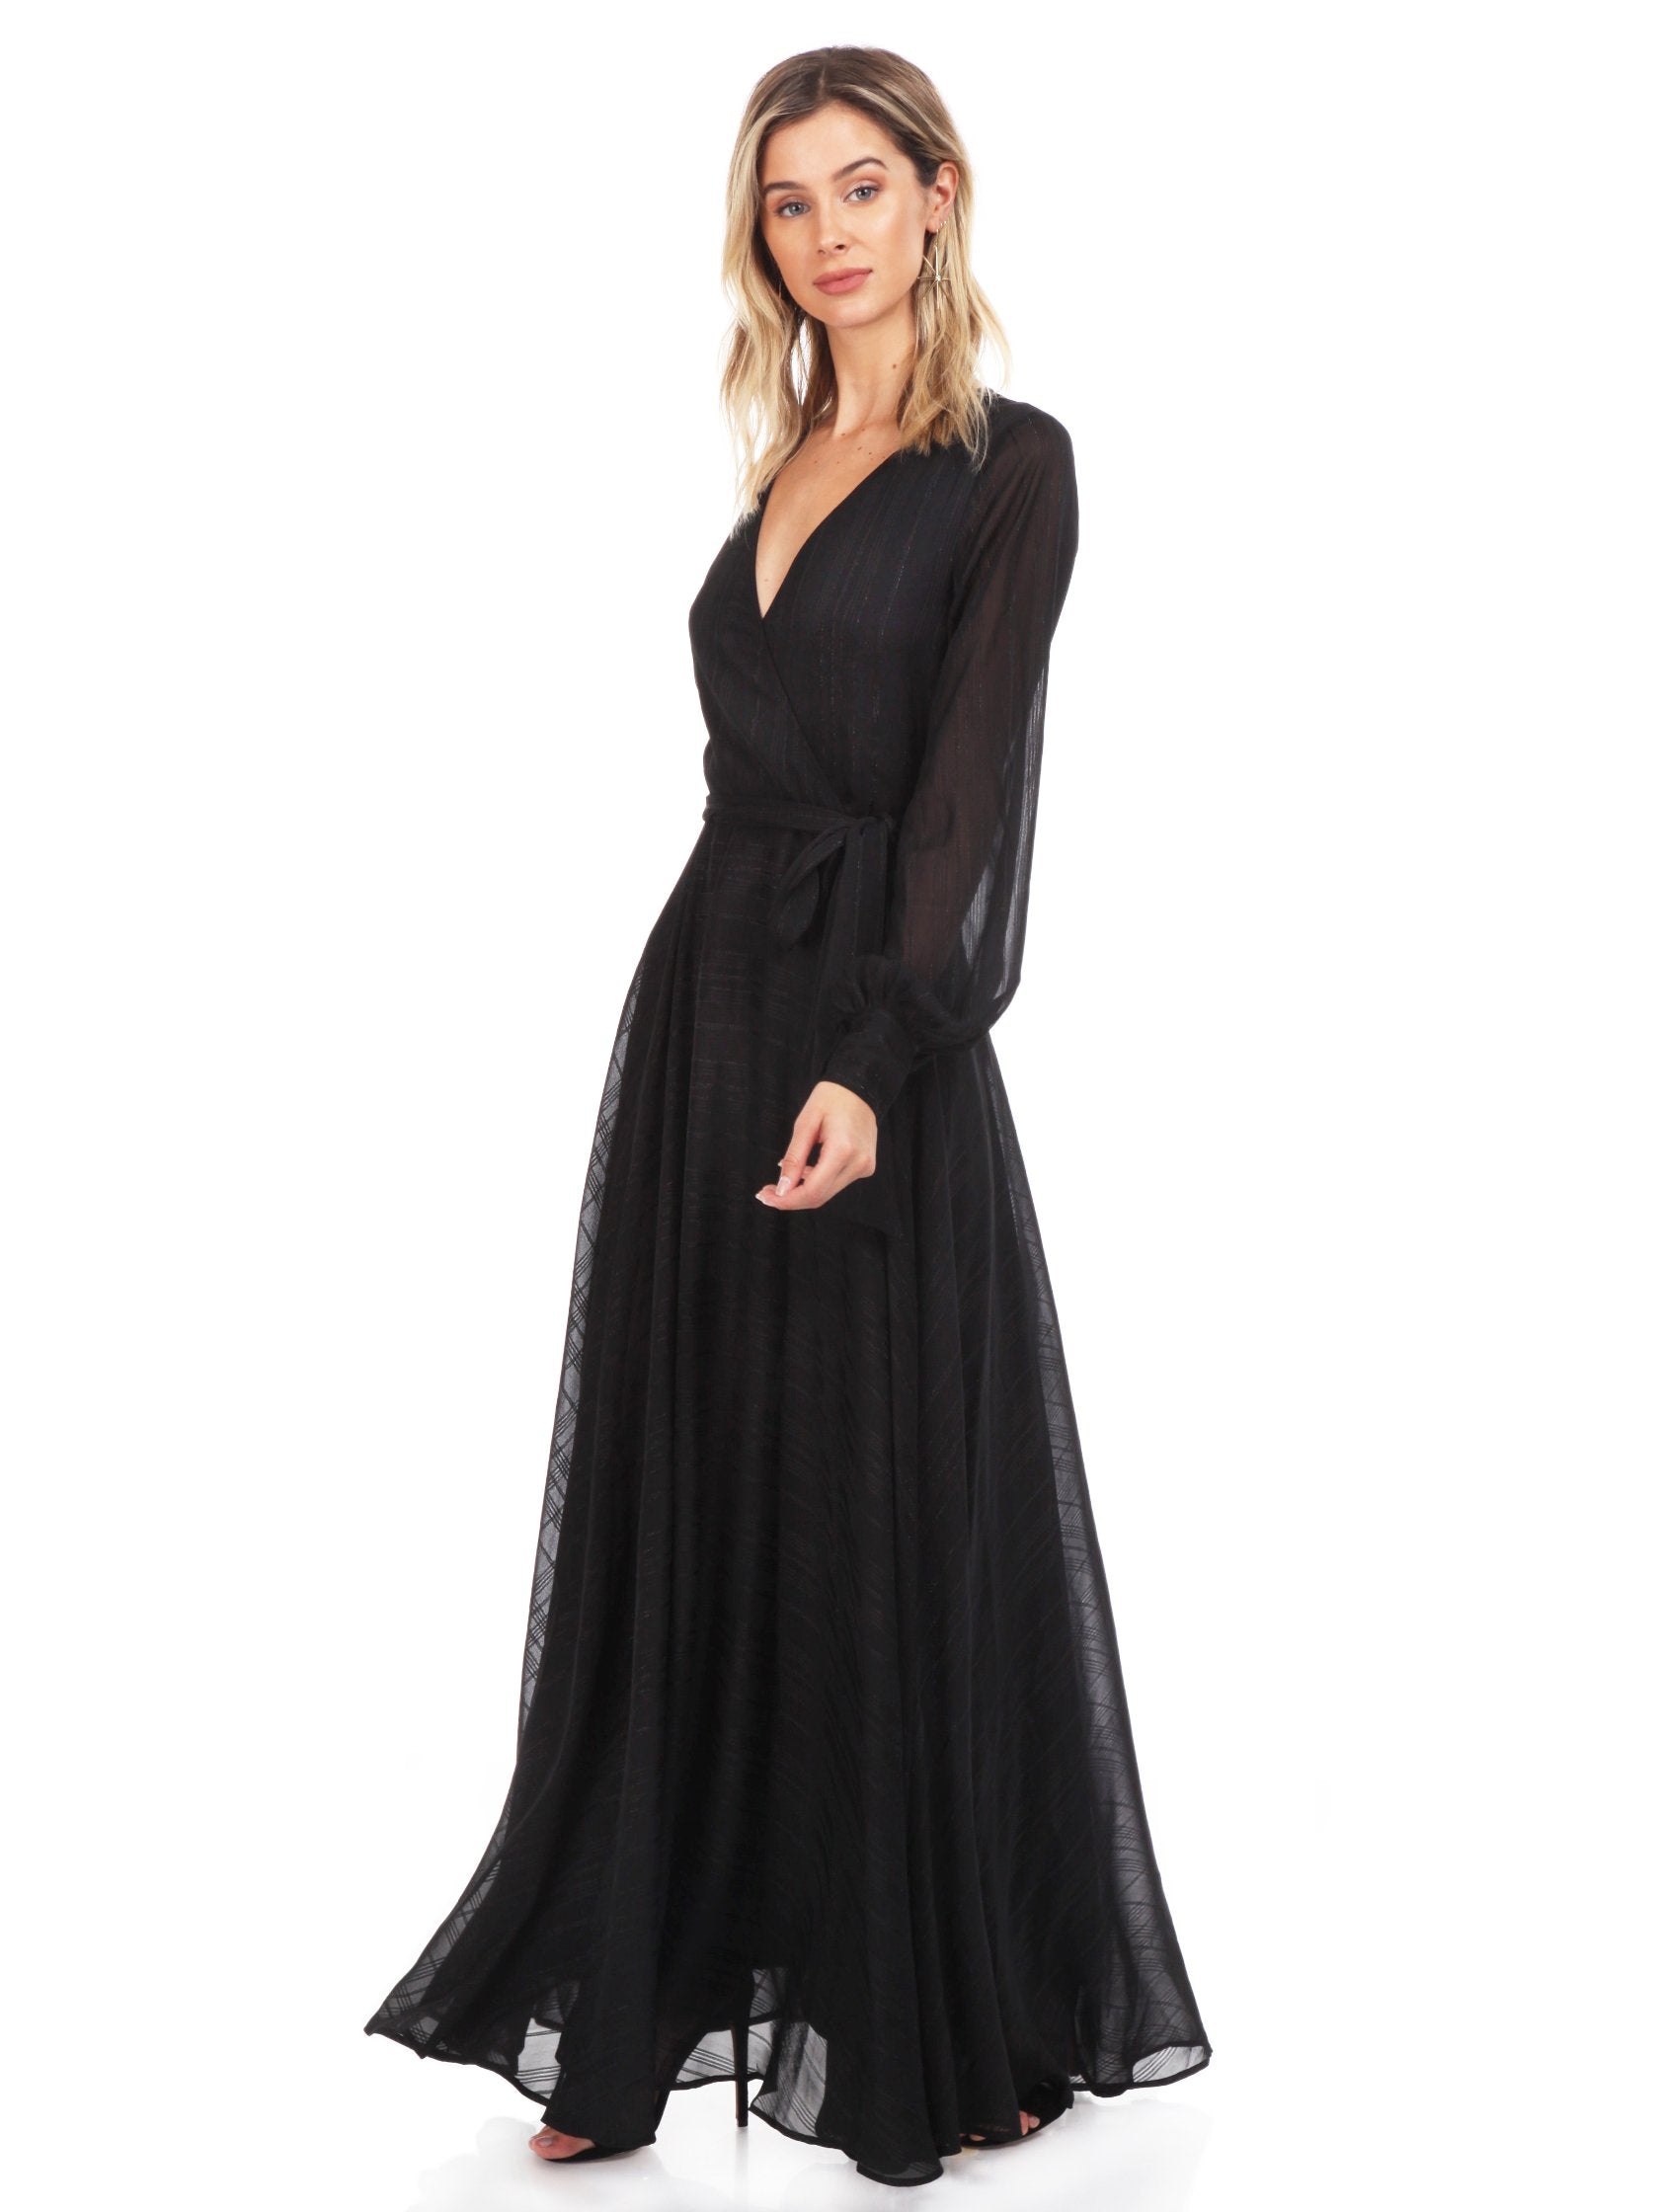 Woman wearing a dress rental from YUMI KIM called Giselle Maxi Dress